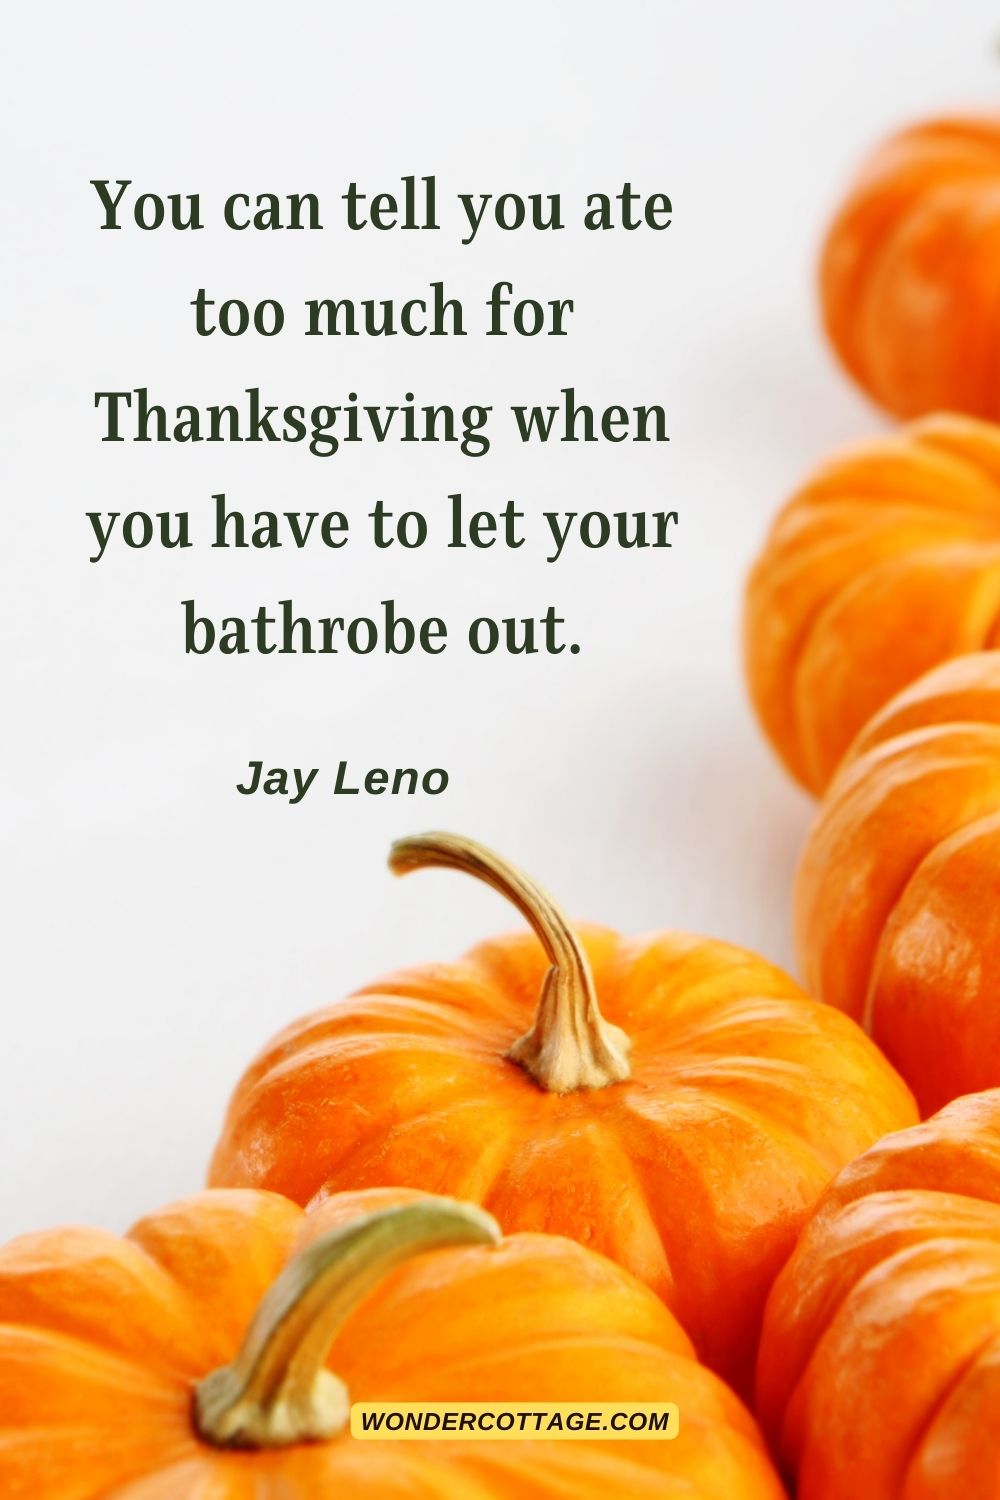 You can tell you ate too much for Thanksgiving when you have to let your bathrobe out. Jay Leno